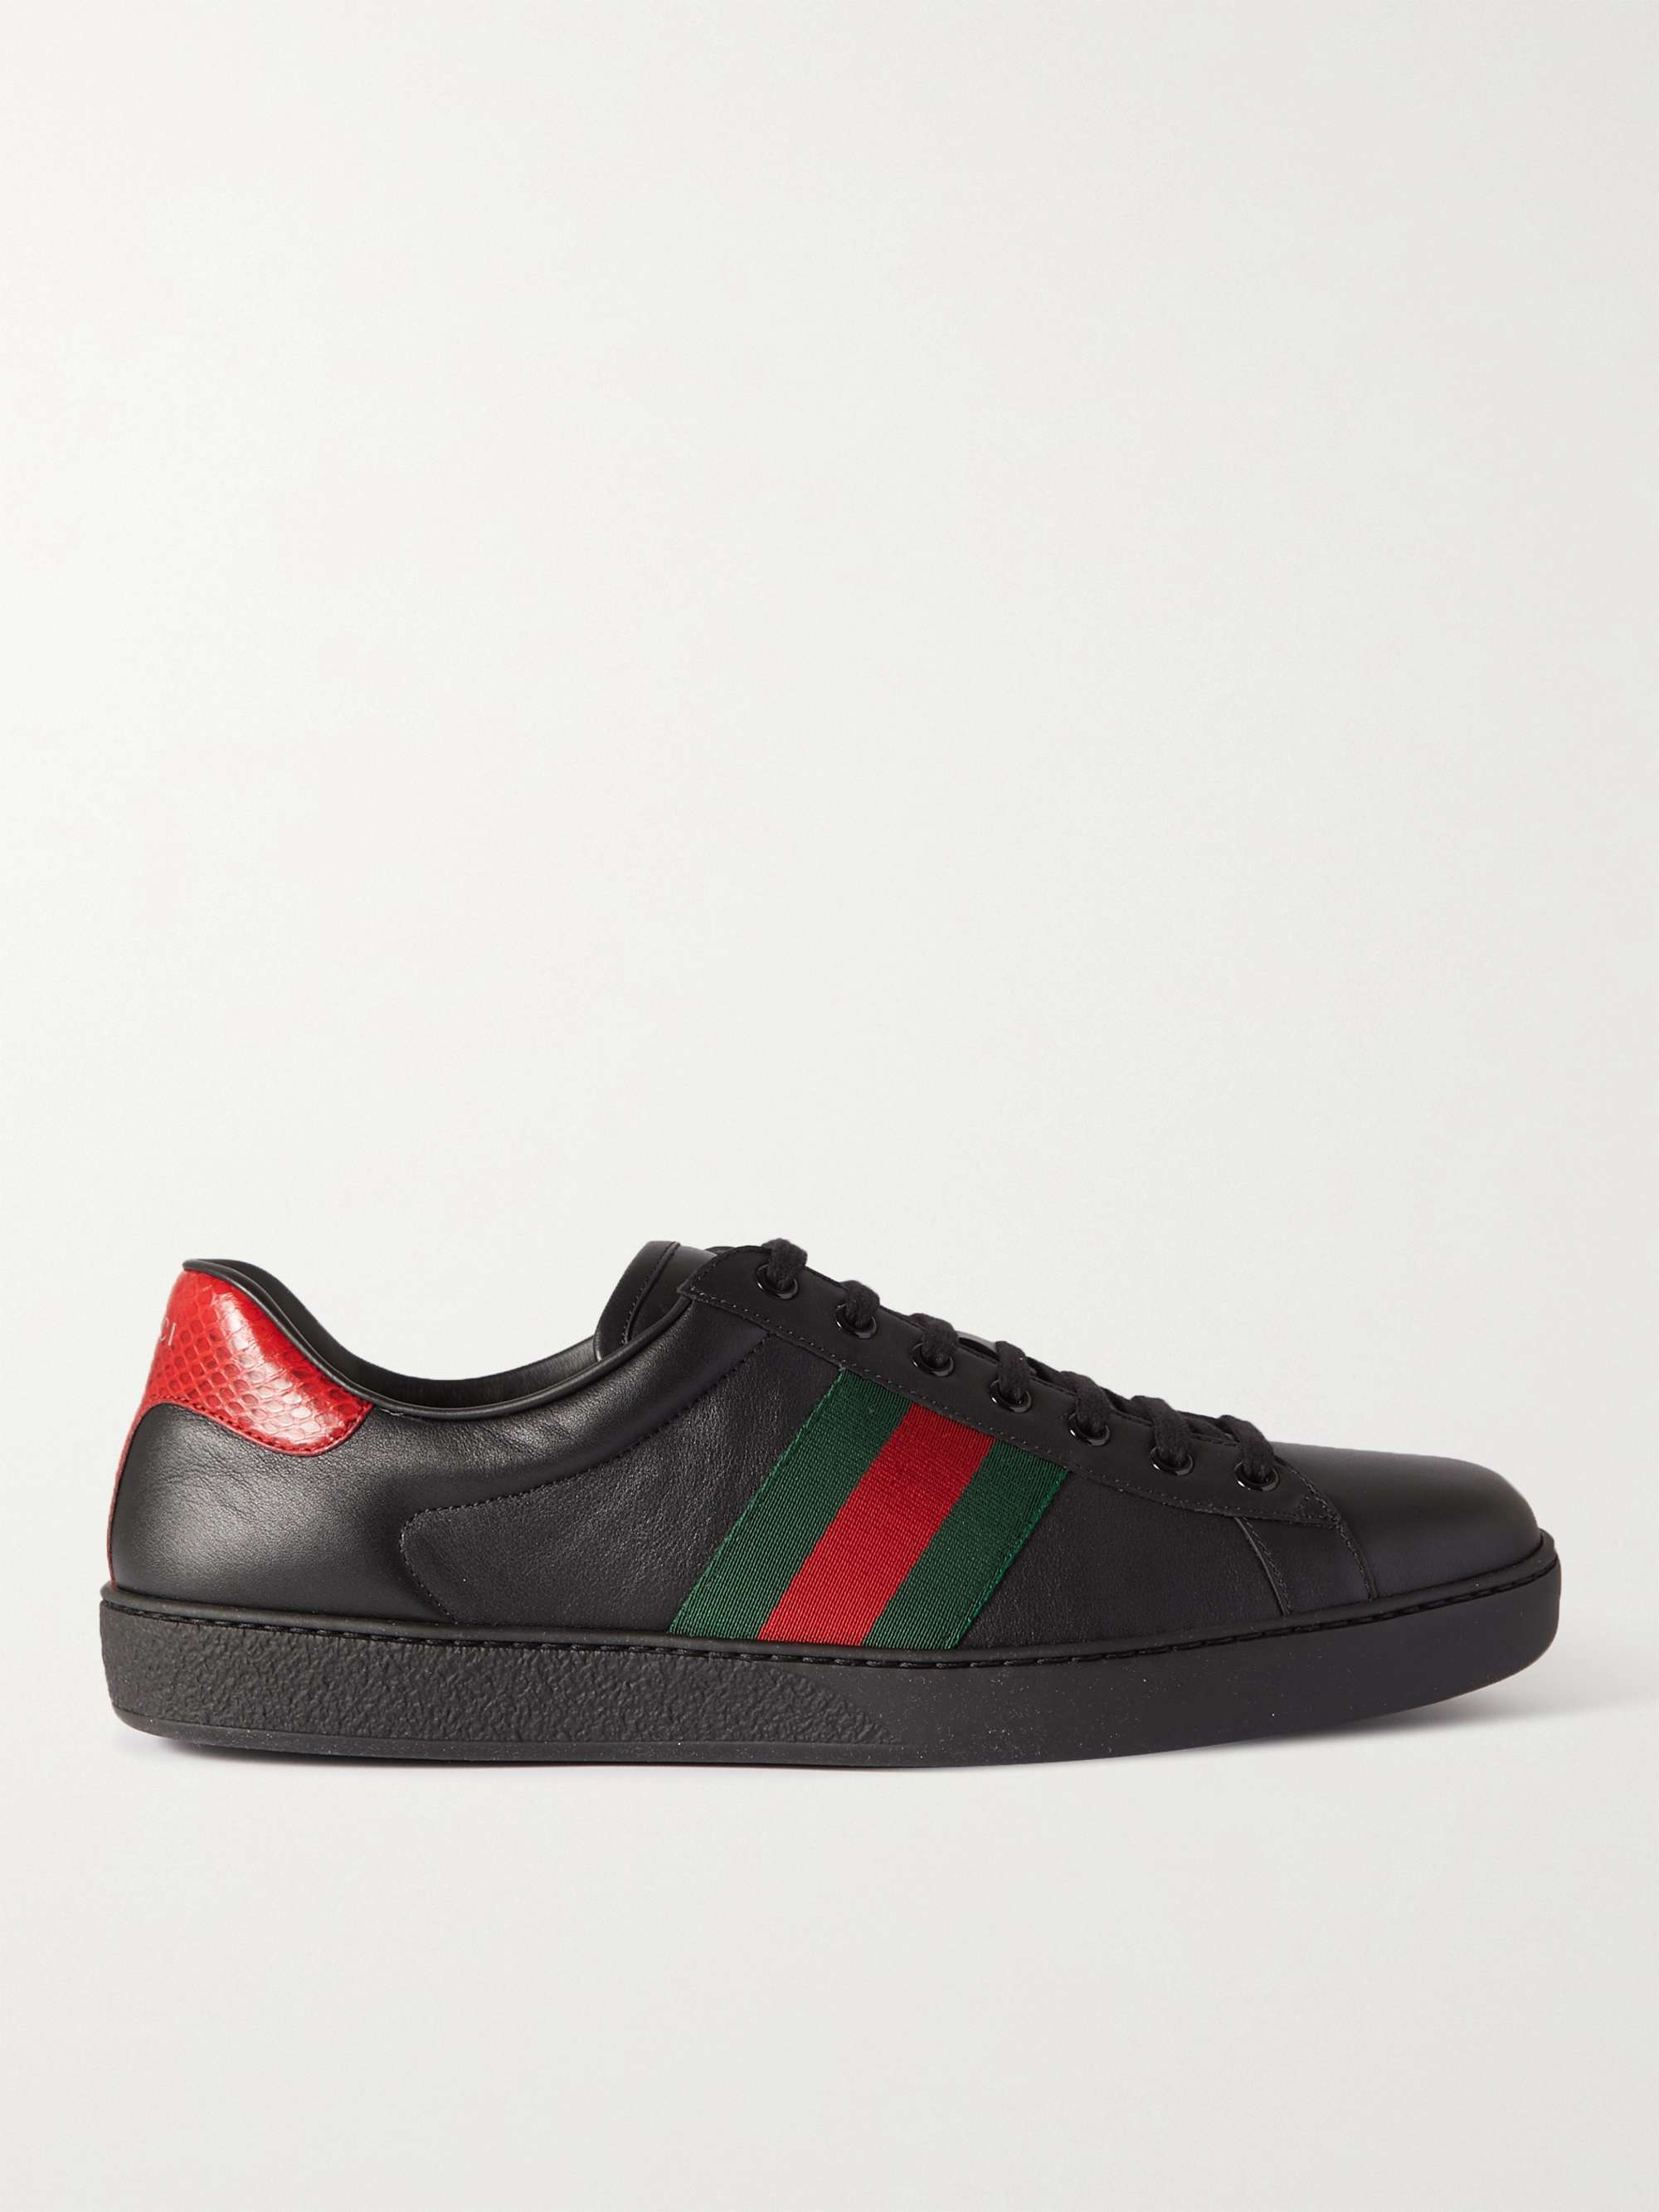 GUCCI Ace Monogrammed Coated-Canvas Sneakers | MR PORTER